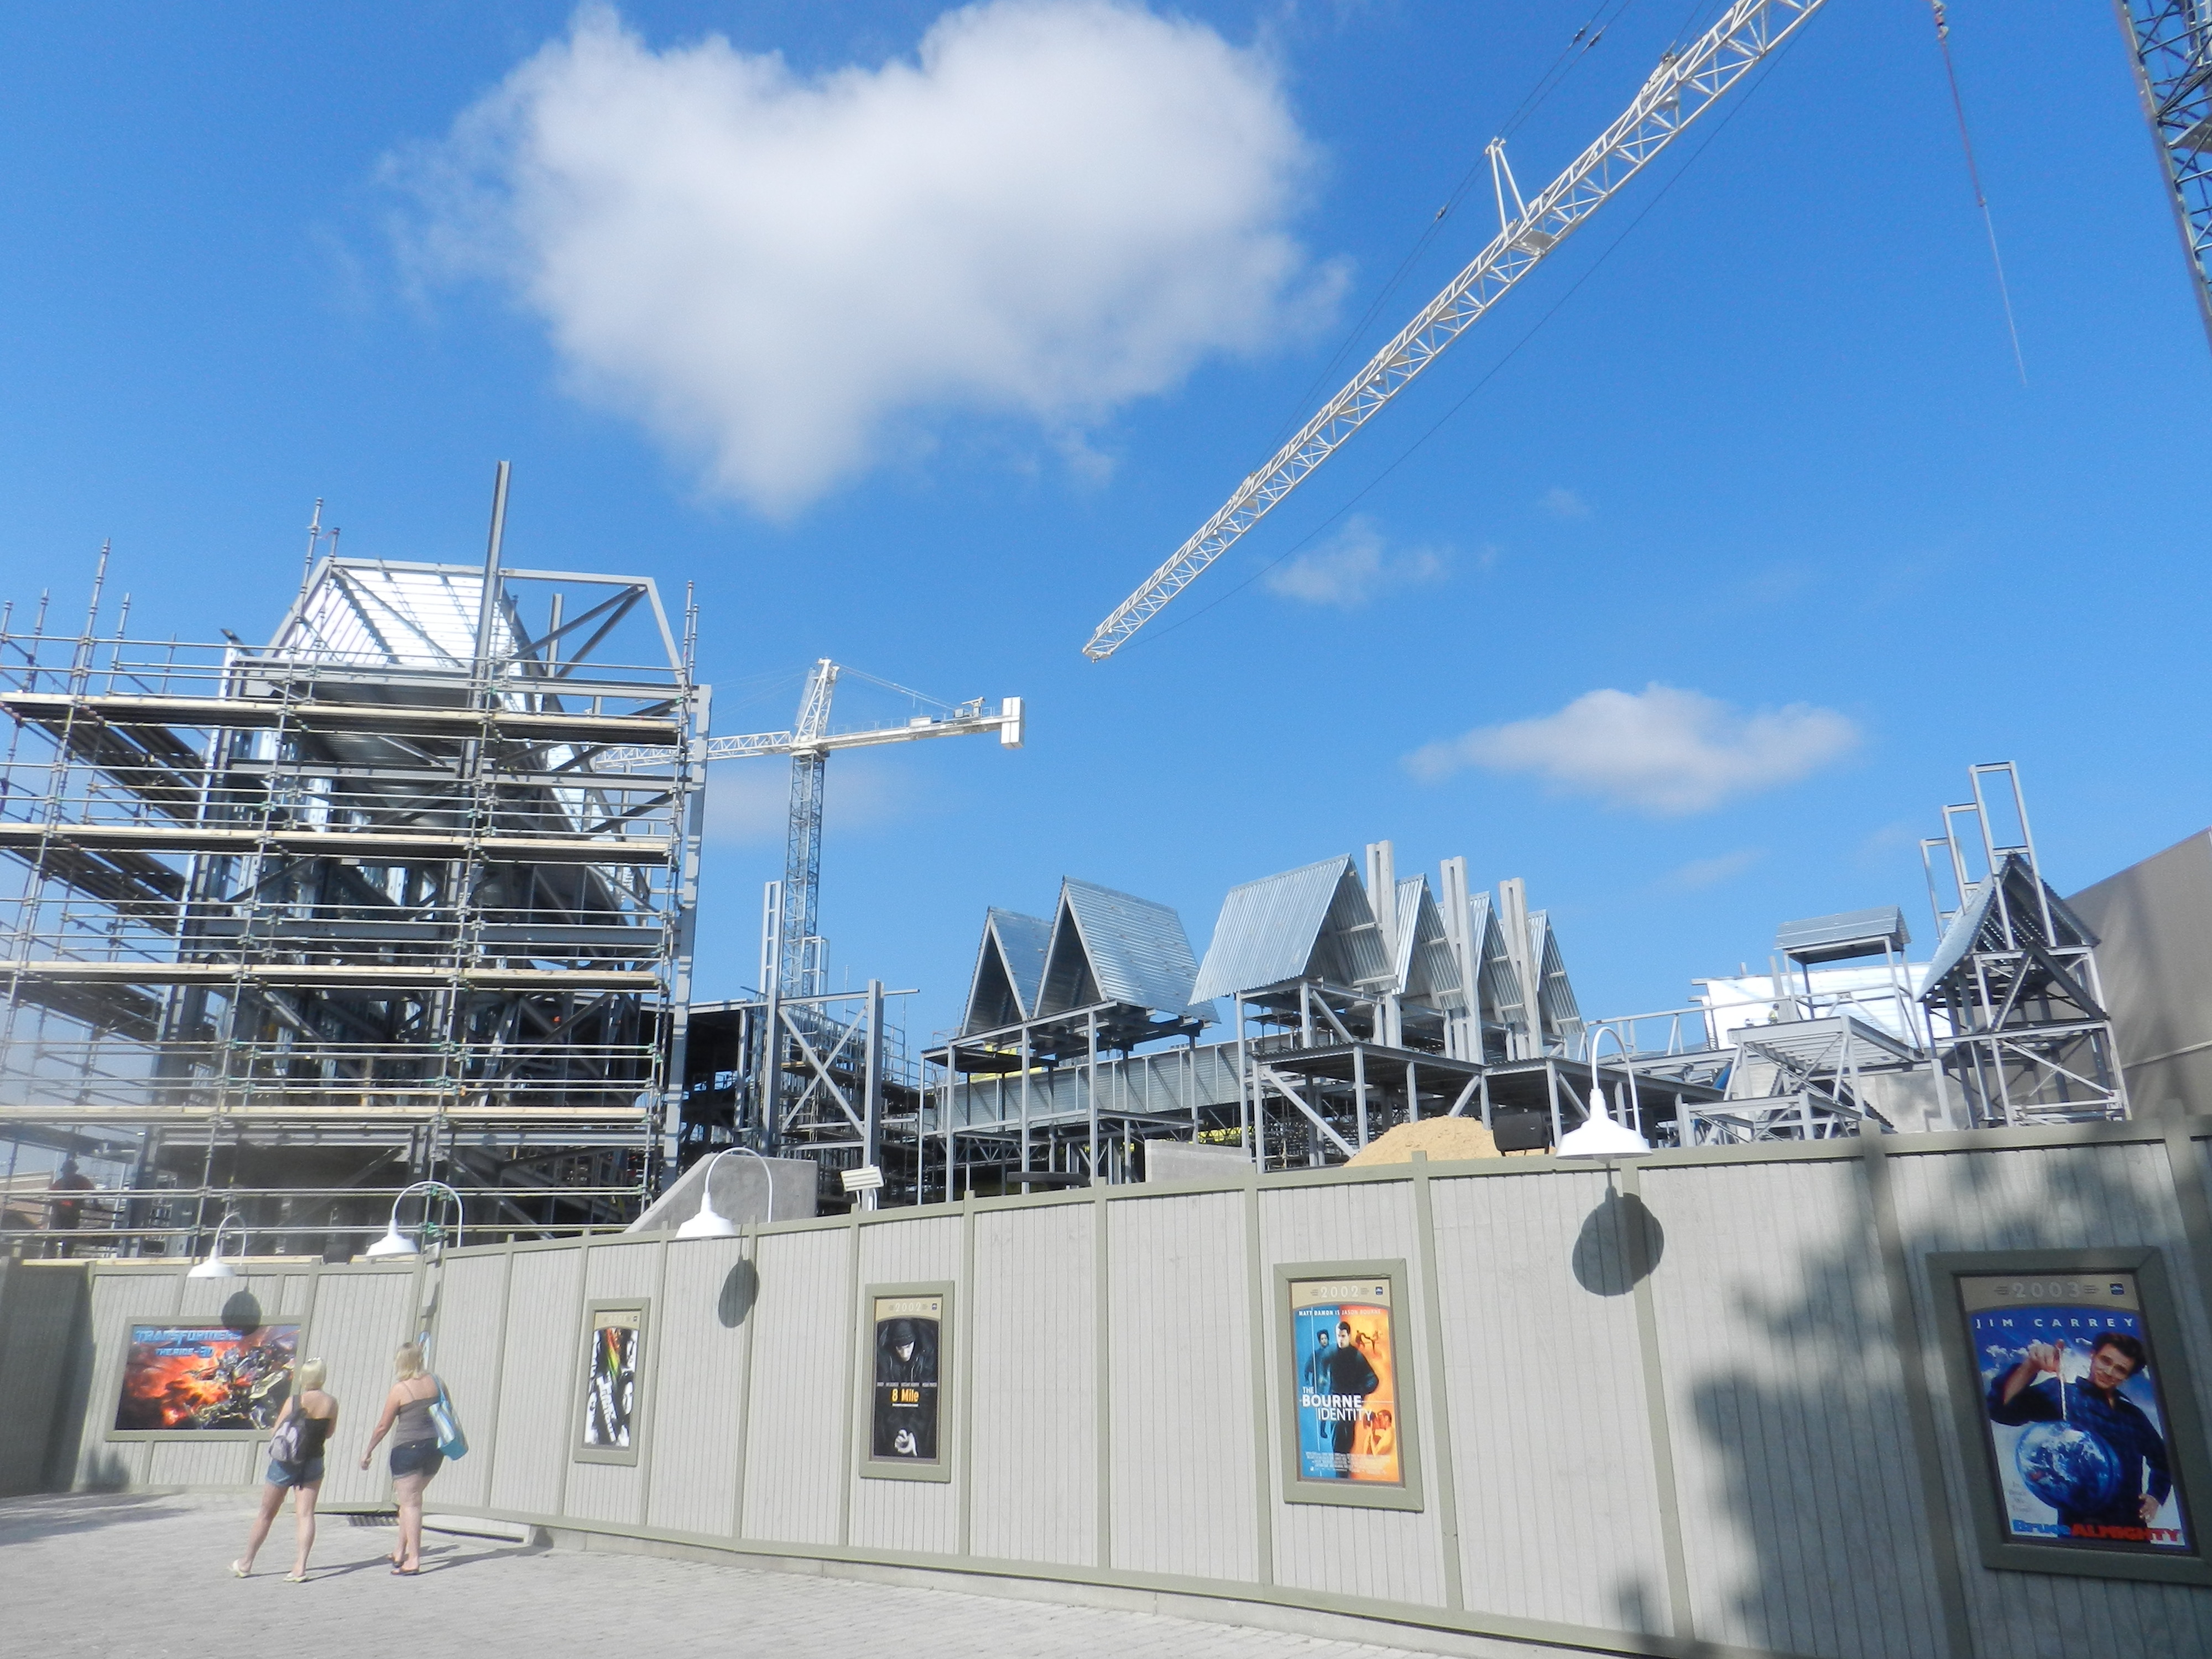 Wizarding World of Harry Potter Construction Diagon Alley Summer 2013